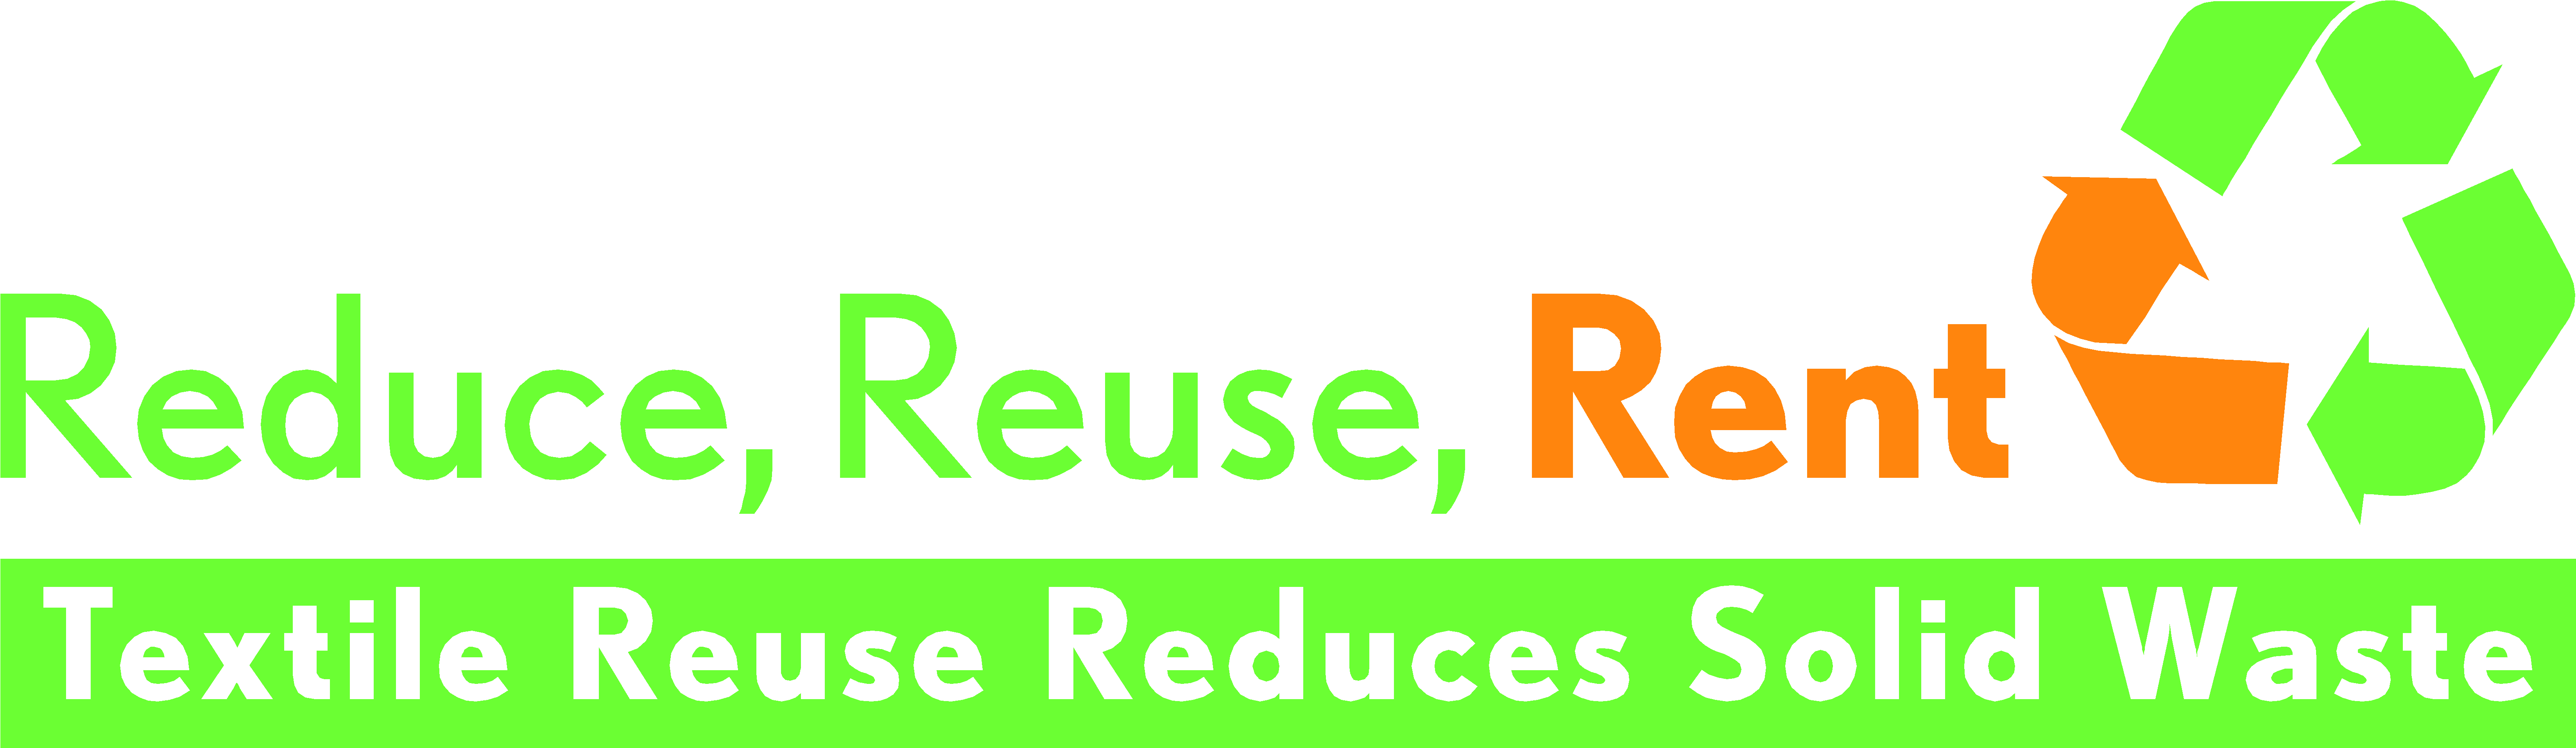 Textile Recycling Slogan PNG